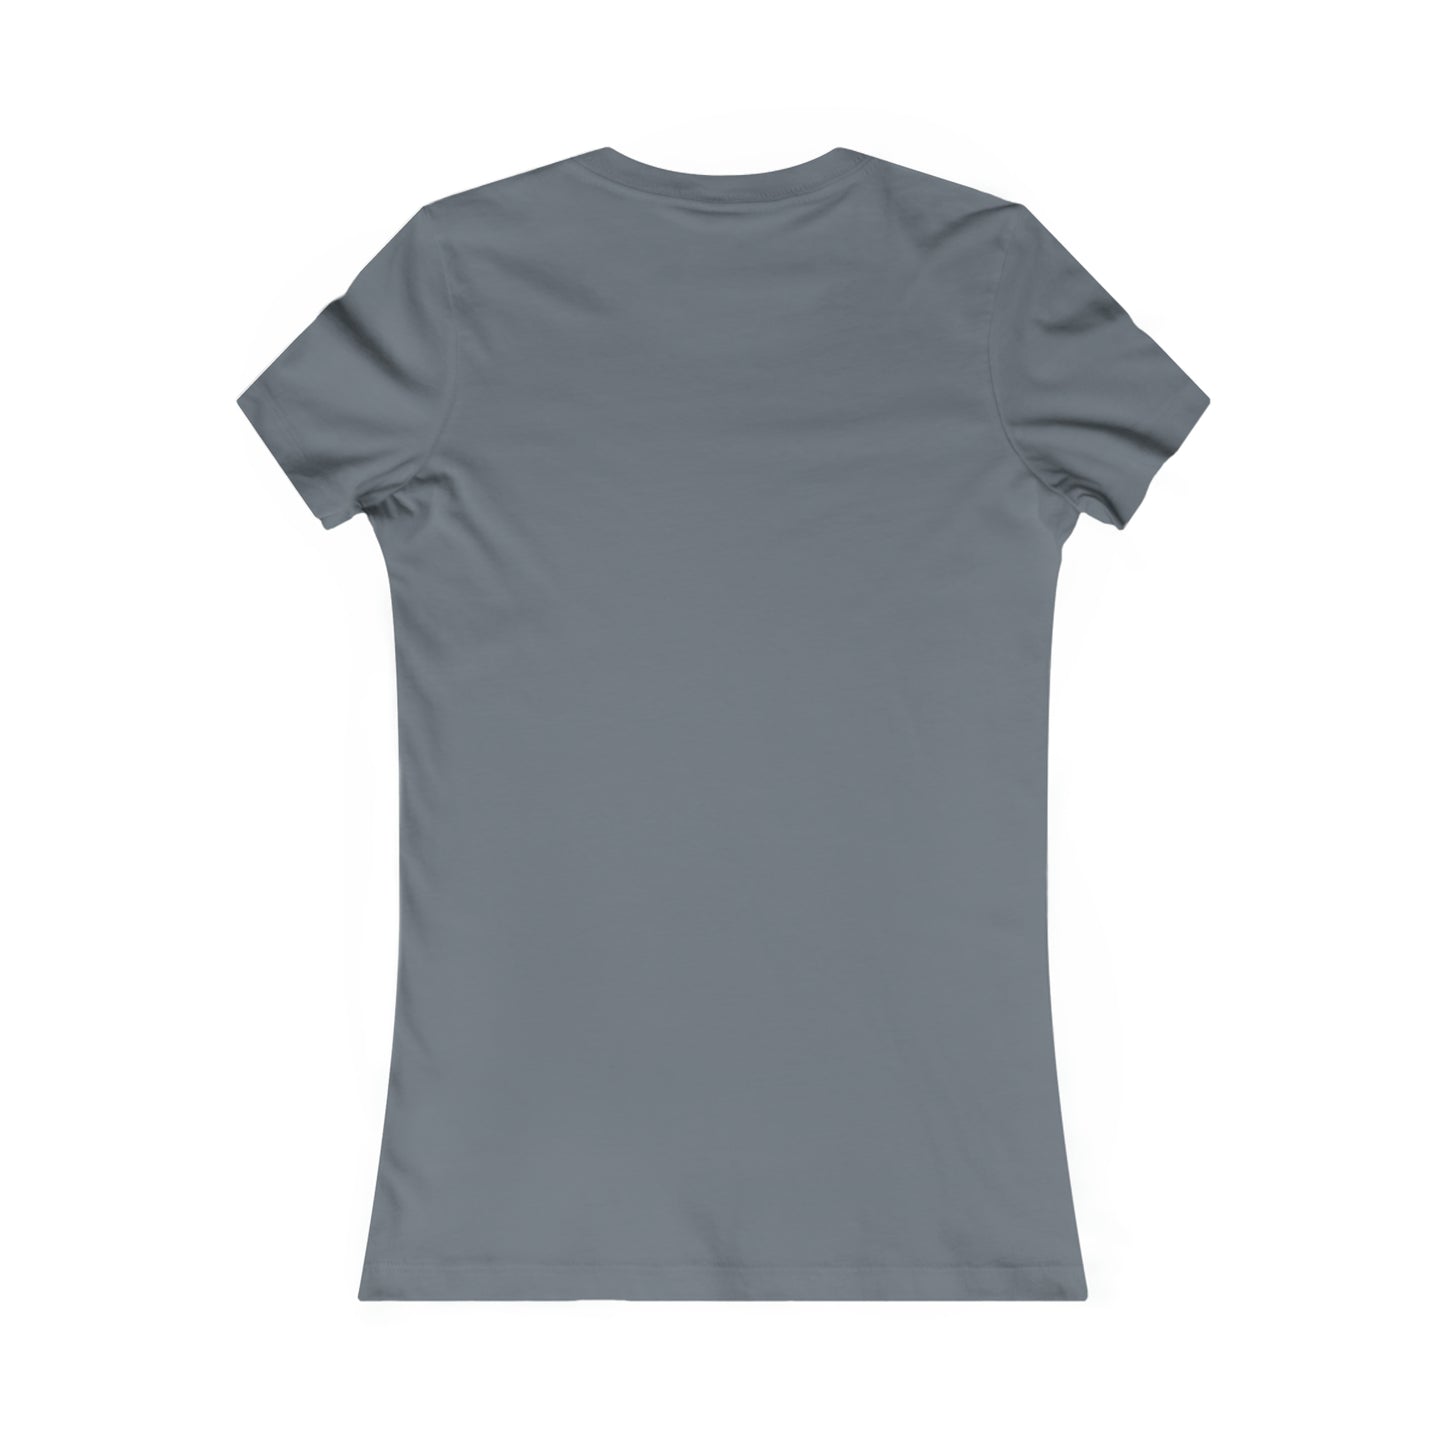 Cat lovers understand this “Catitude Central” Women's Favorite Tee. Available in several colors for you to choose from. Slim fit so please check the size table.